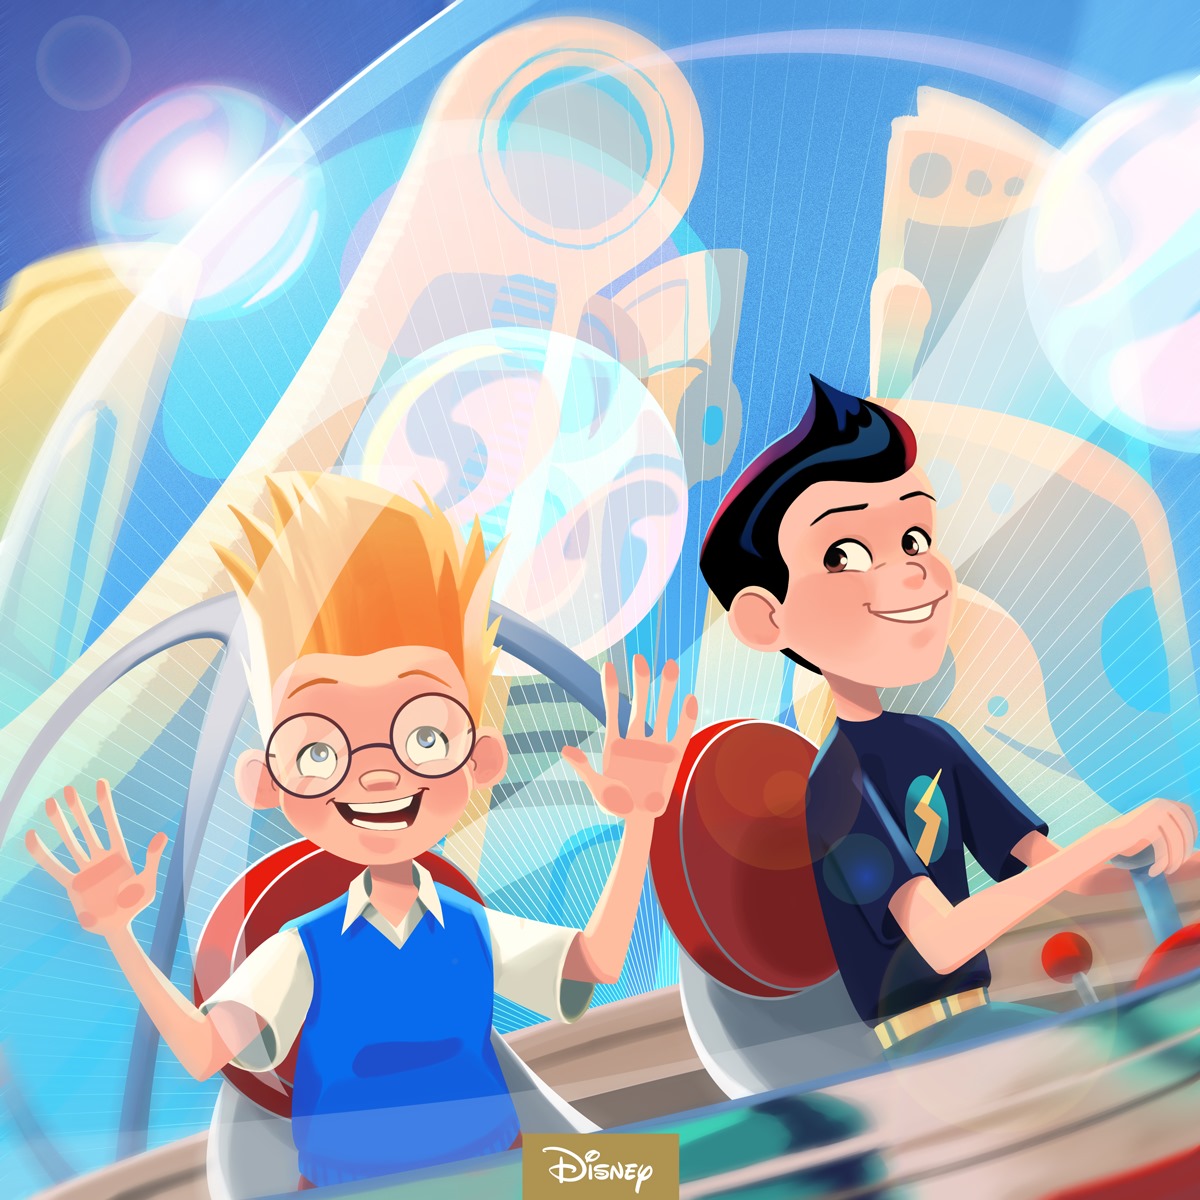 Meet The Robinsons Always Remember To Keep Moving Forward